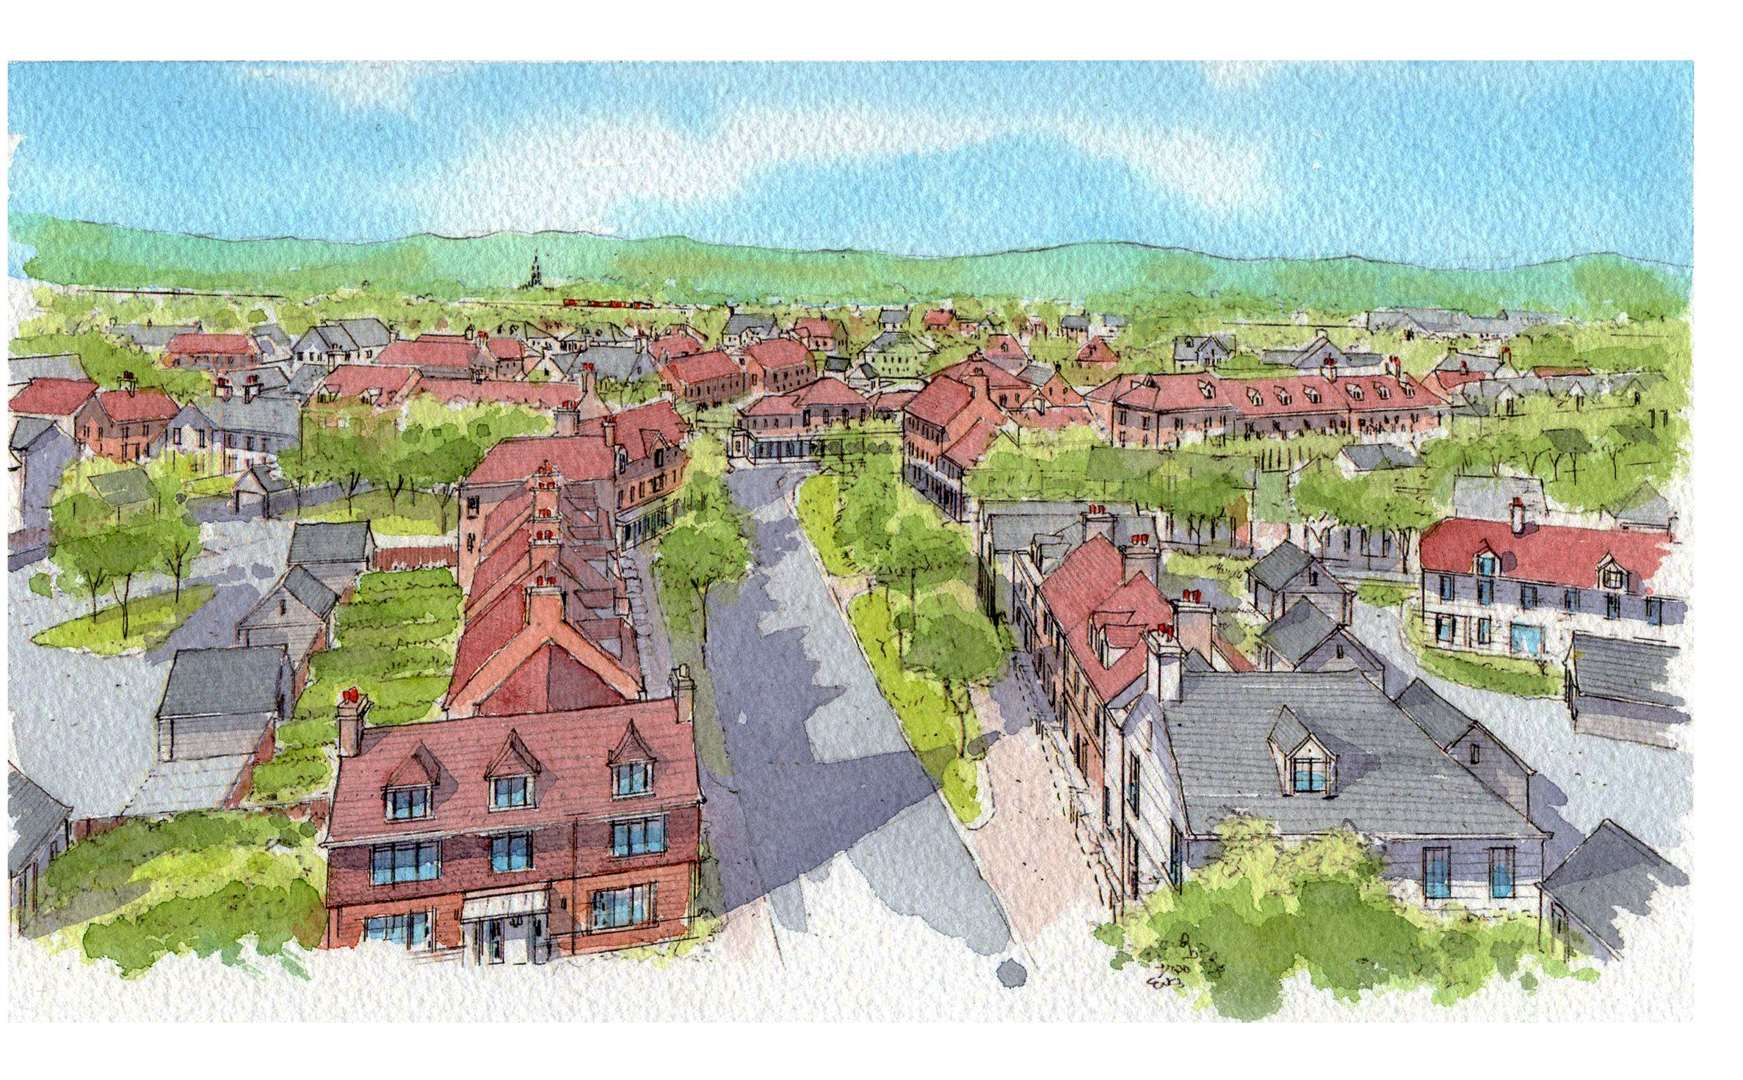 A developer's illustration of what the garden village would have looked like